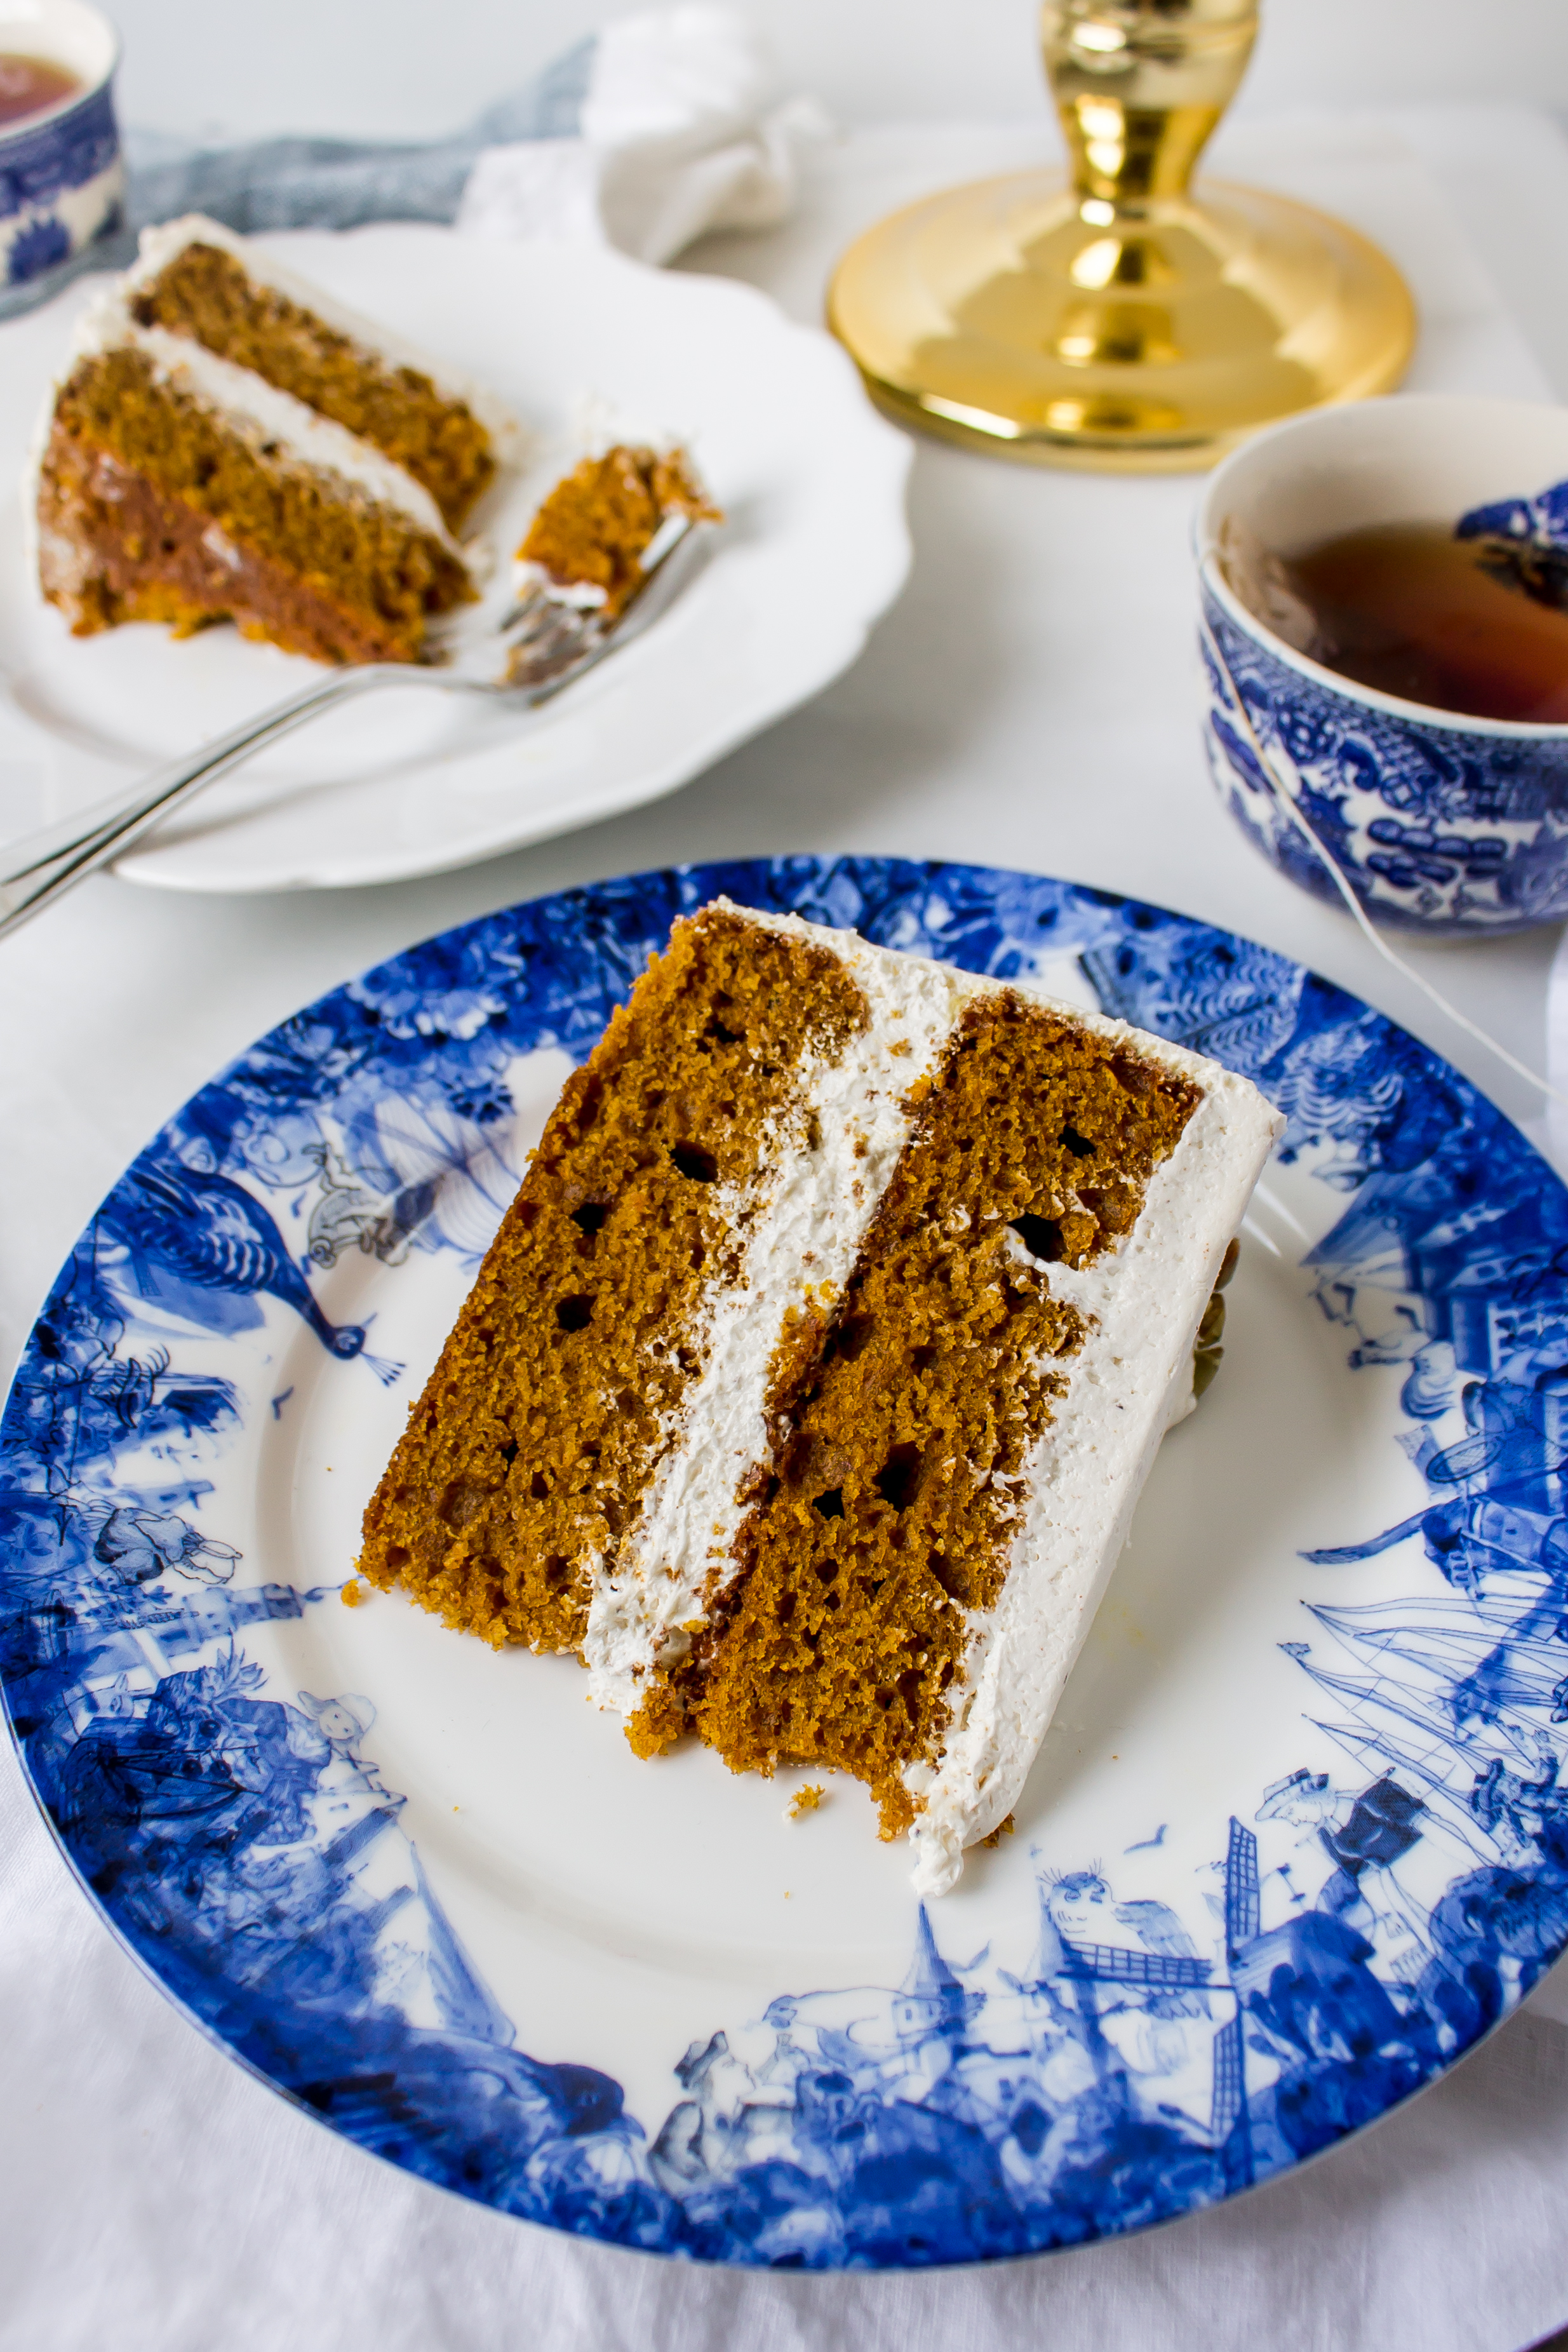 Pumpkin cake with brown butter frosting is perfect for fall. It is wonderfully moist and filled with fall spices and that amazing nutty browned butter flavor to create the ultimate delicious seasonal combination. | www.passthecookies.com